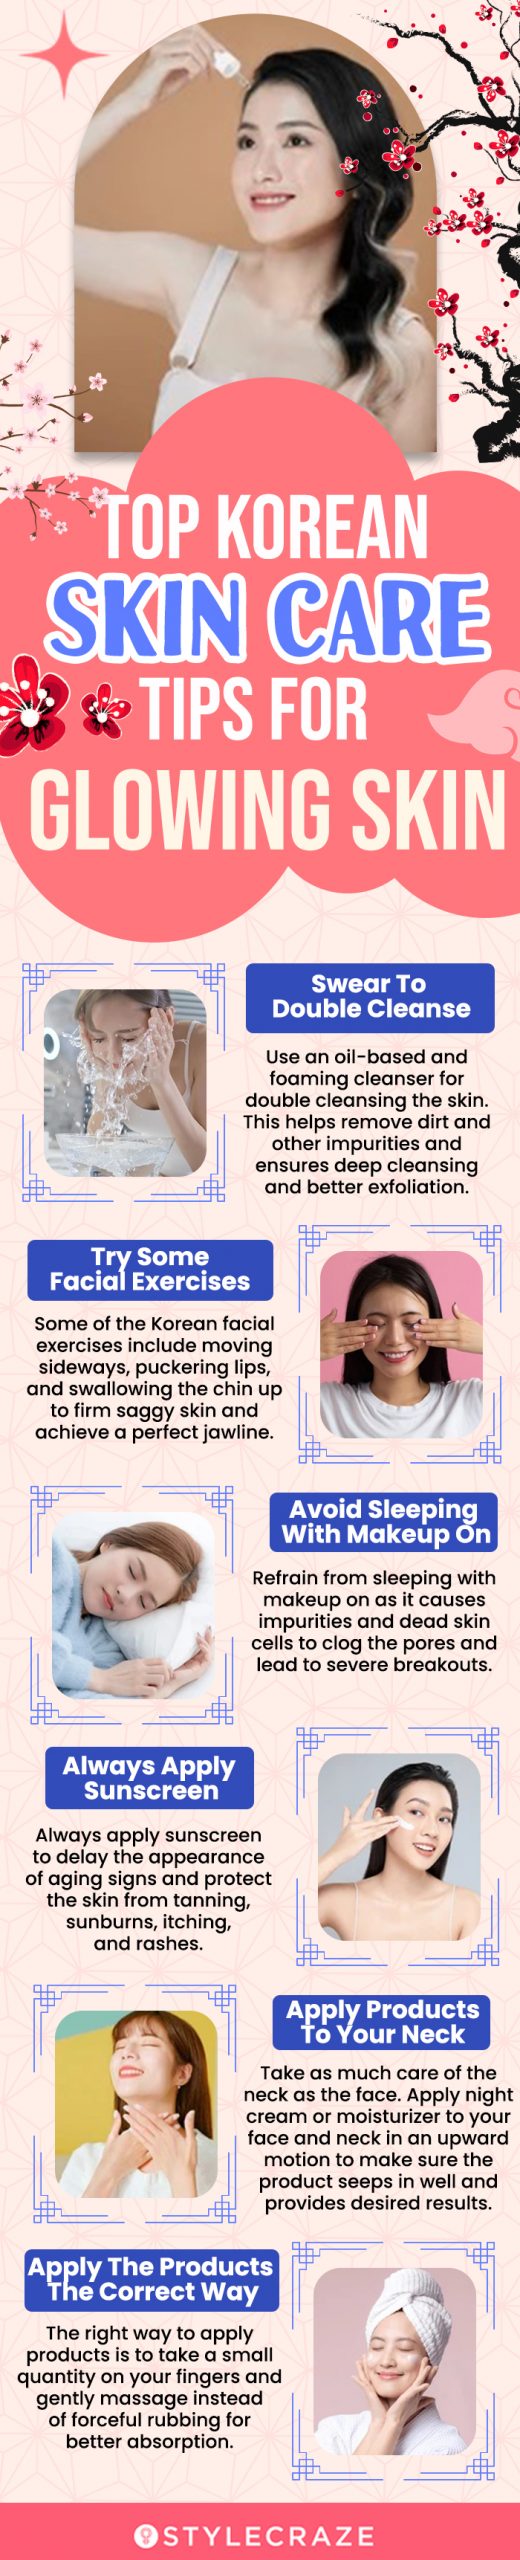 Top Korean Skin Care Tips For Glowing Skin(infographic)